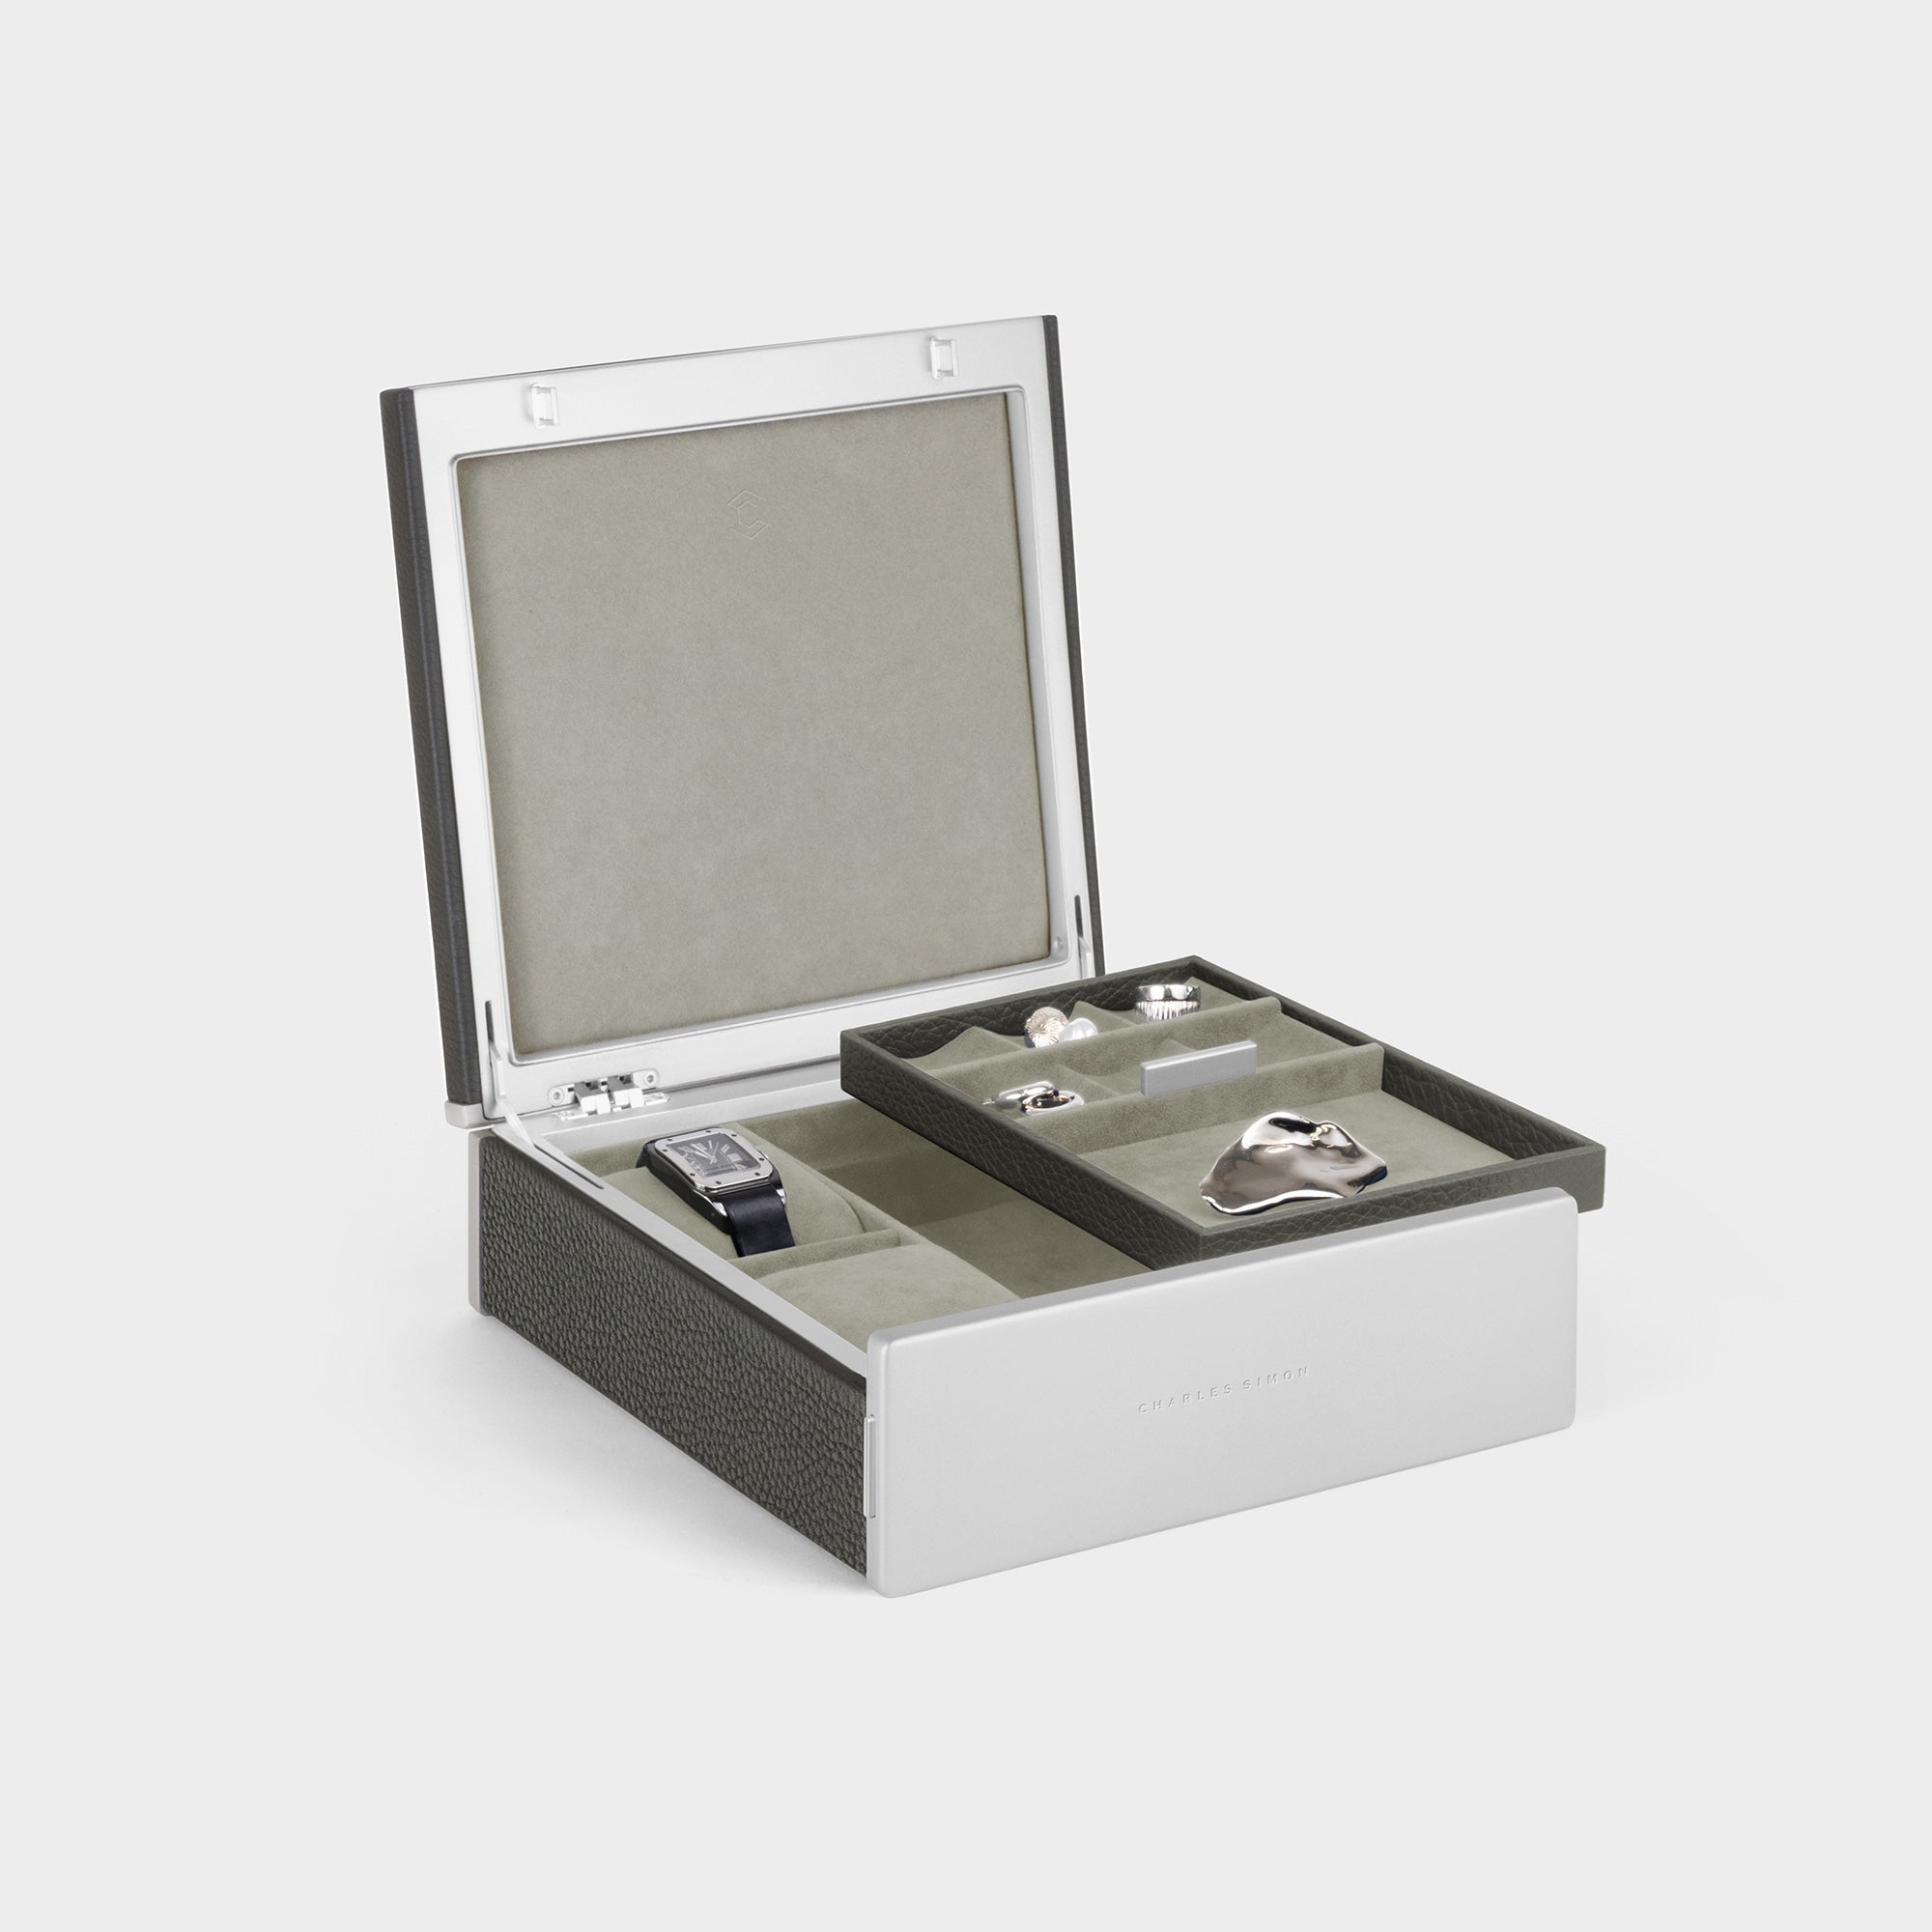 Product photo of open Taylor 2 Watch and Jewelry box  in graphite leather and seasand interior. The removable jewelry tray is placed on the carbon fiber and anodized aluminum frame of the Spence 6 Watch box. 